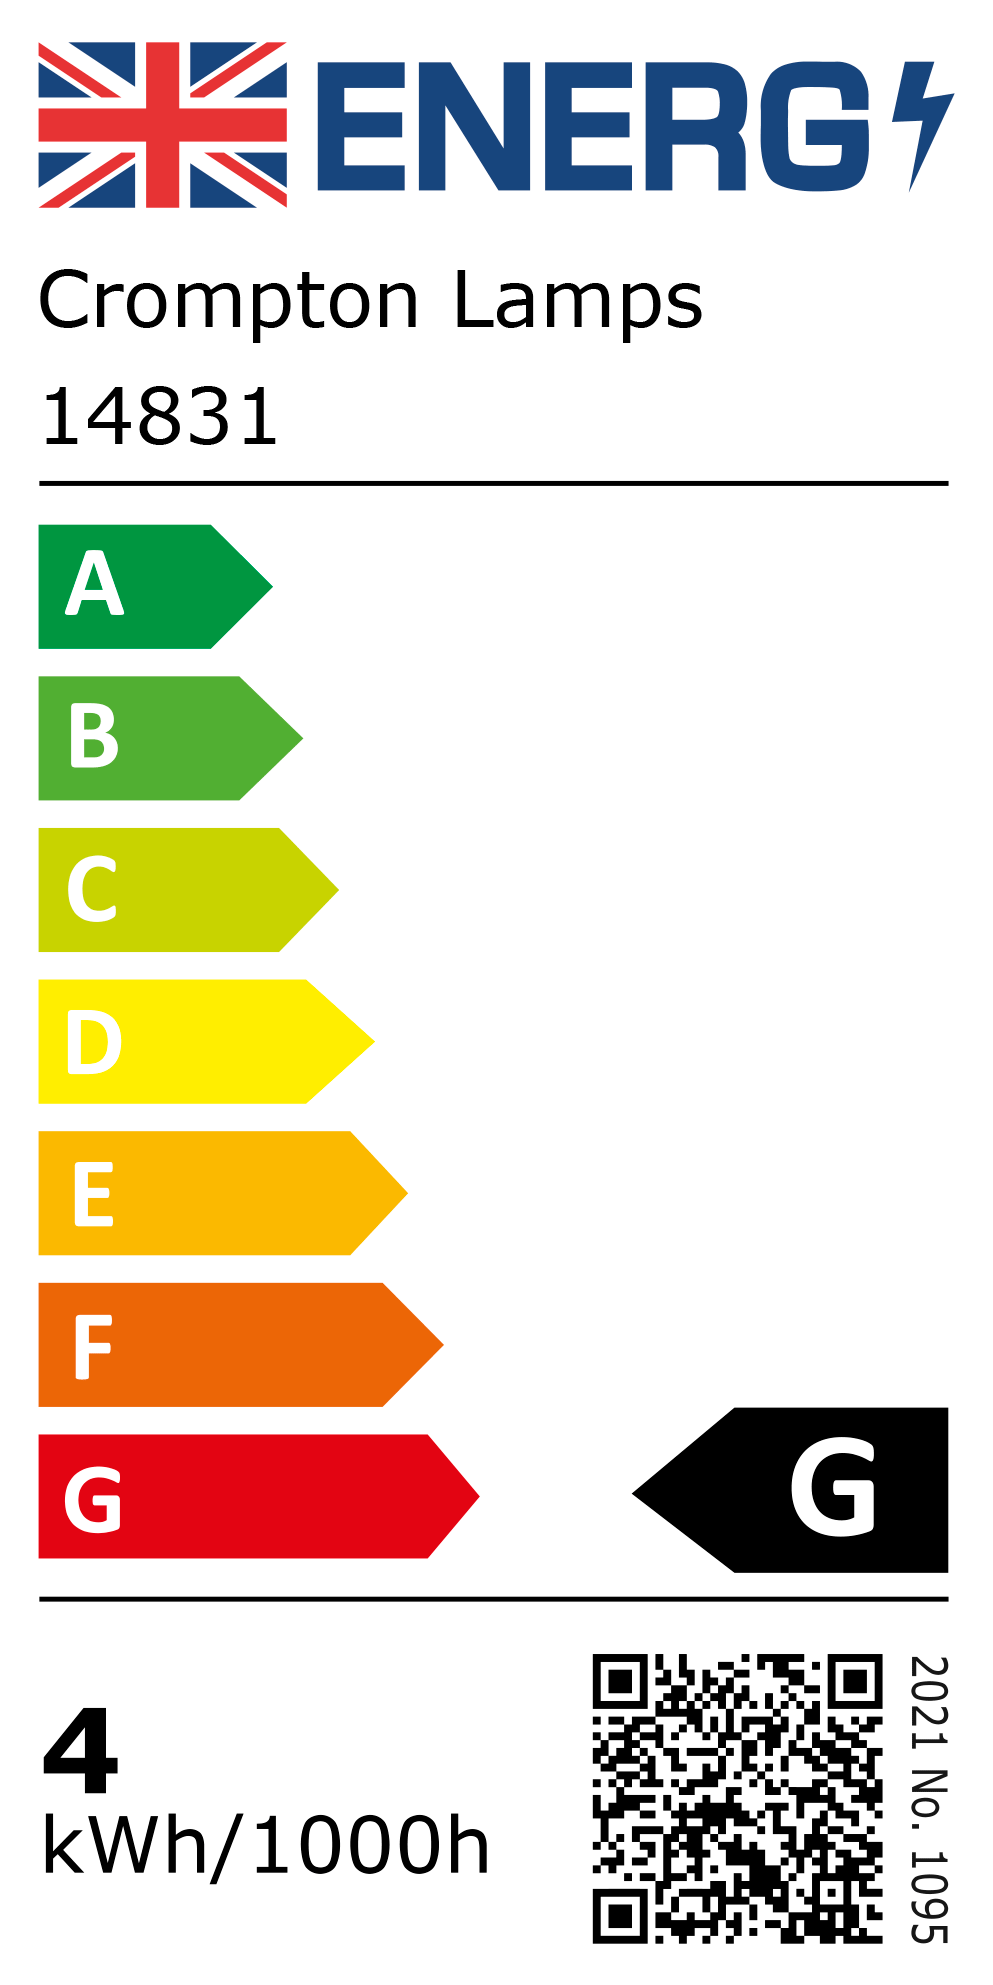 New 2021 Energy Rating Label: Stock Code 14831